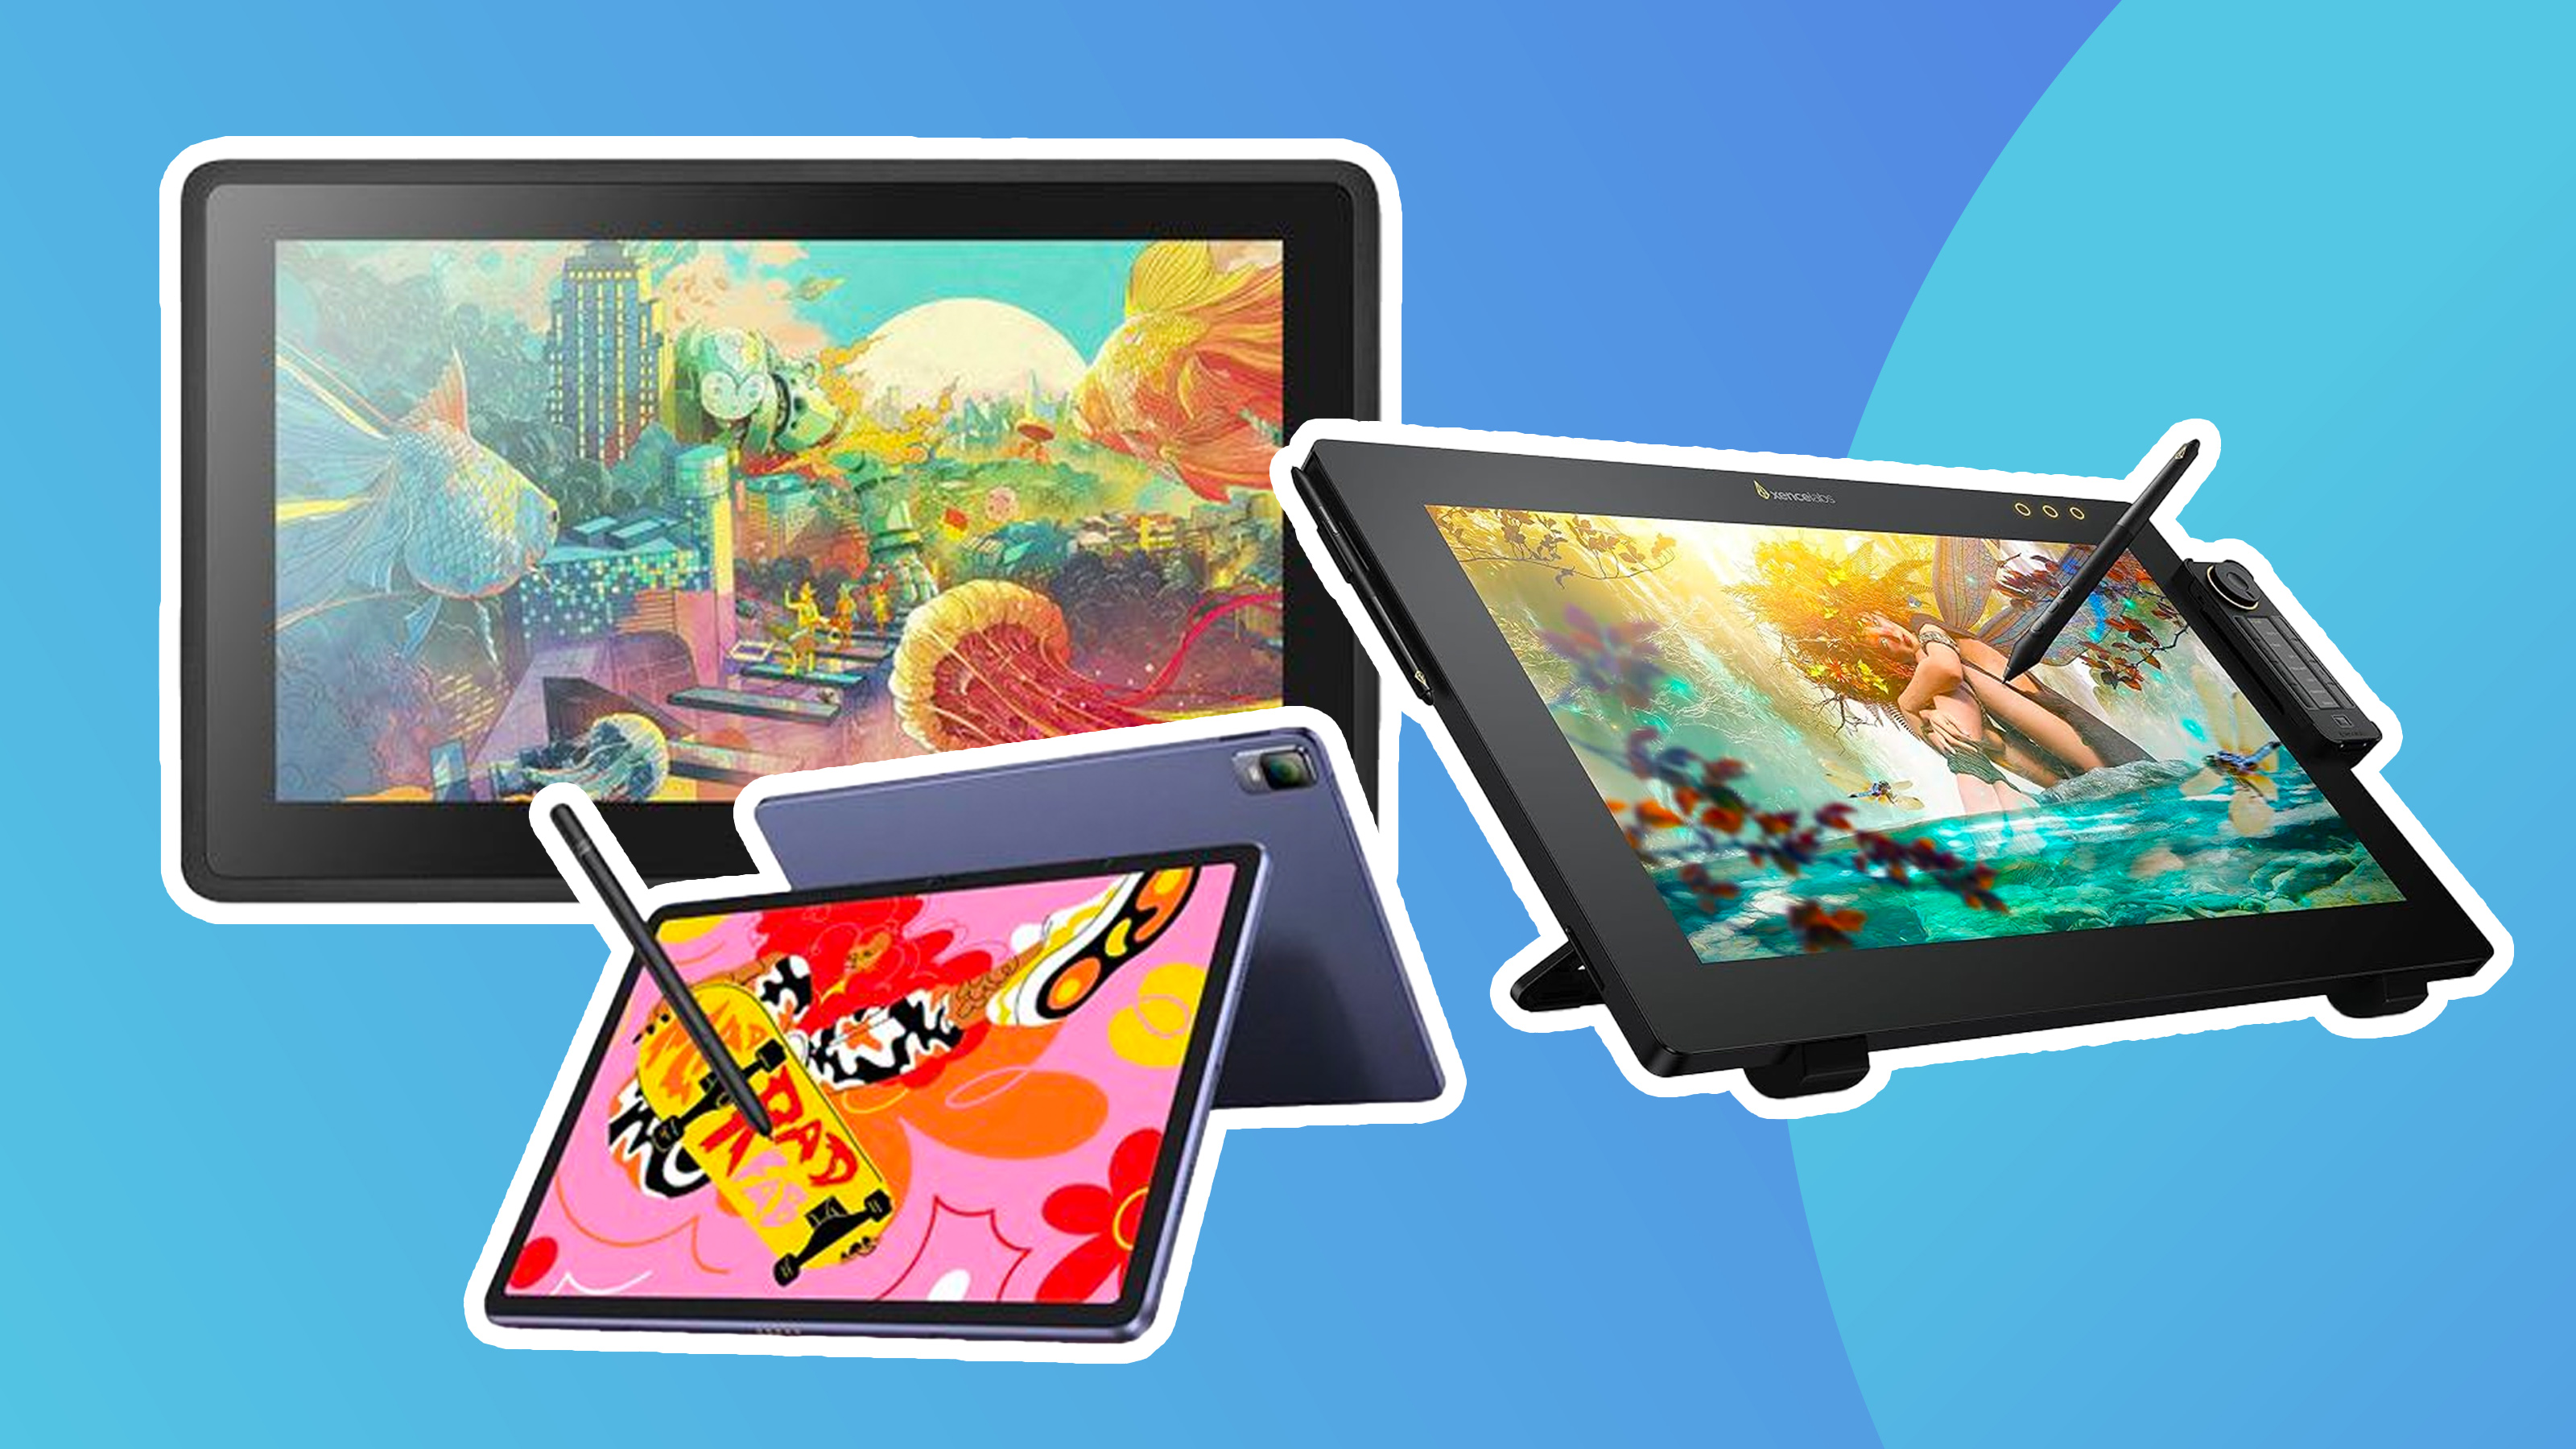 The best drawing tablets